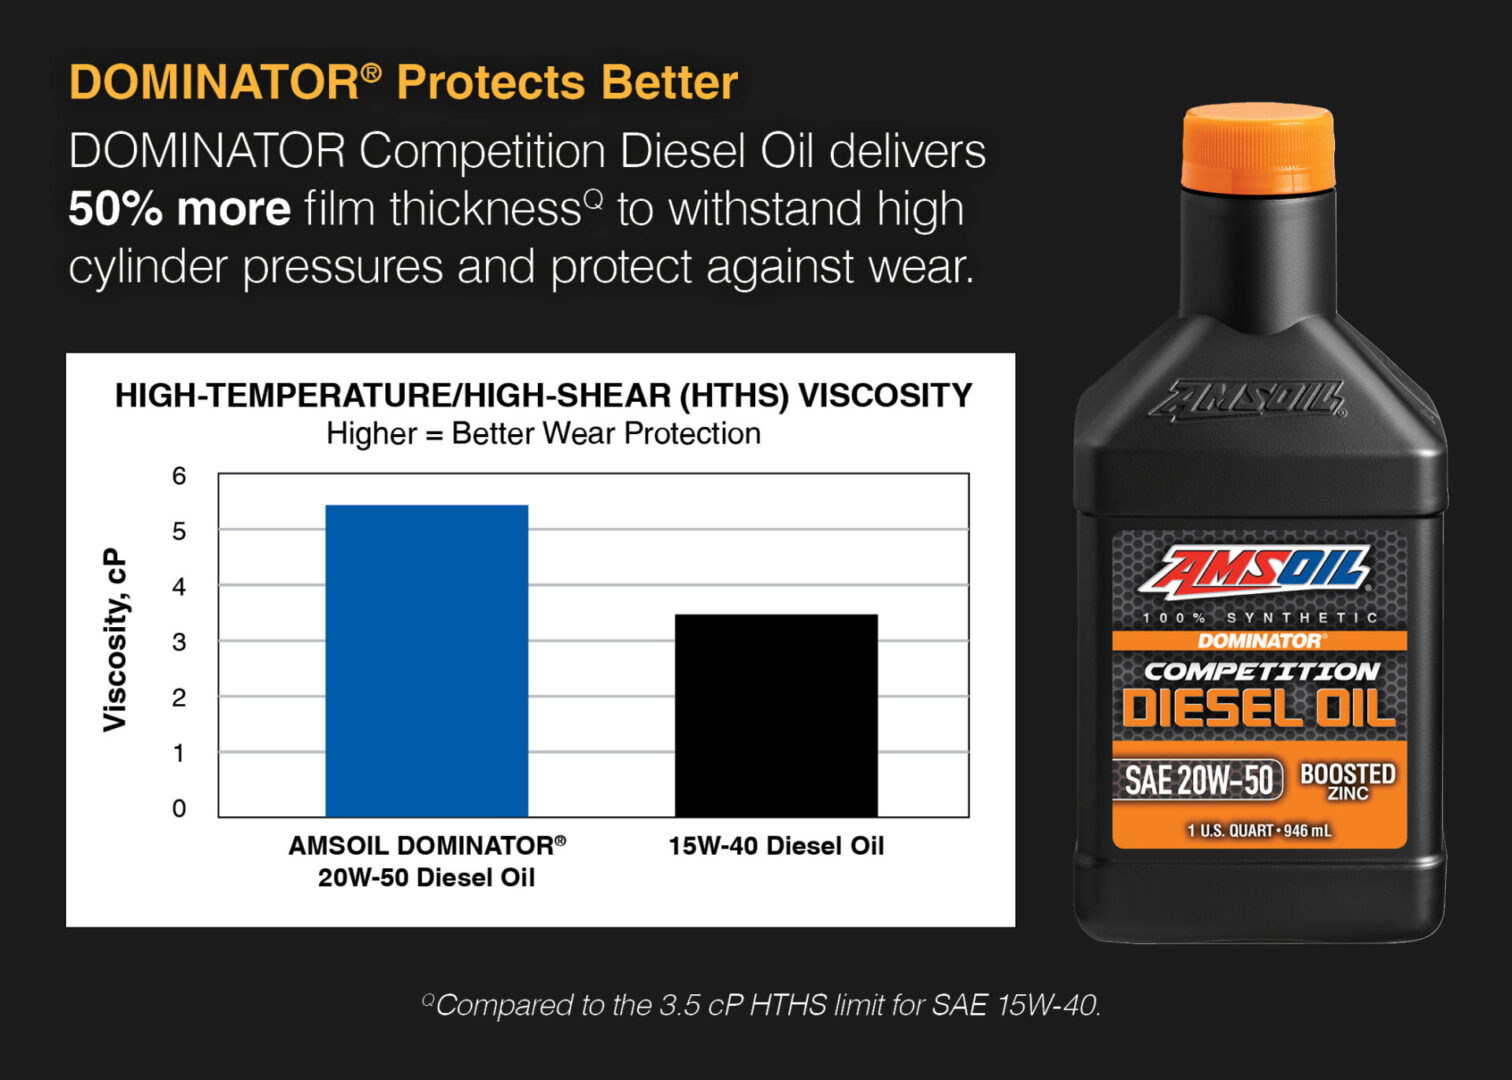 DOMINATOR® Competition Diesel Oil